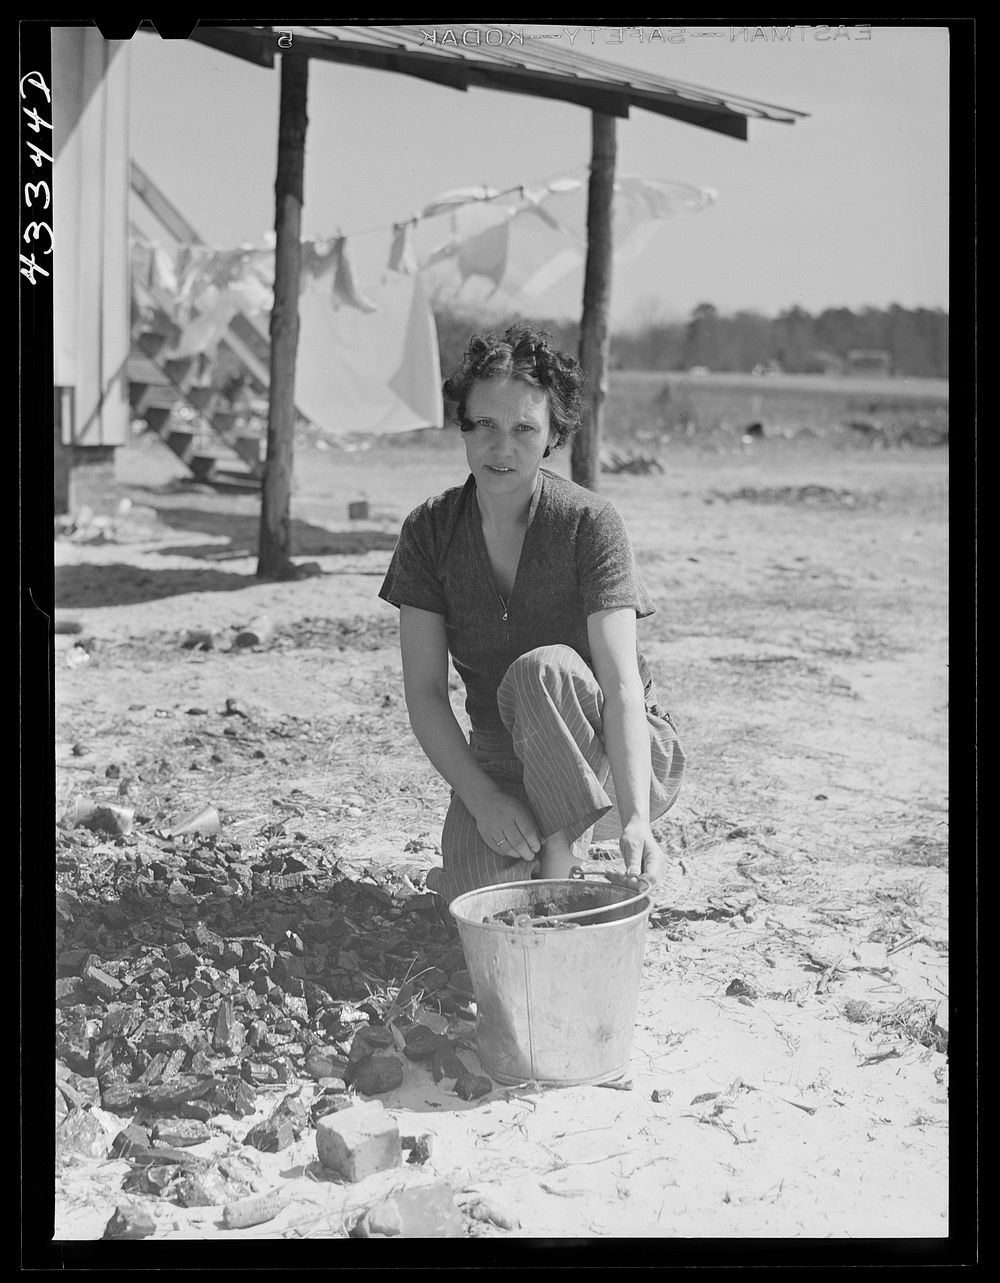 Woman who lives with her family in the upper part of tobacco barn, gathering coal. Husband works at Fort Bragg. Near…